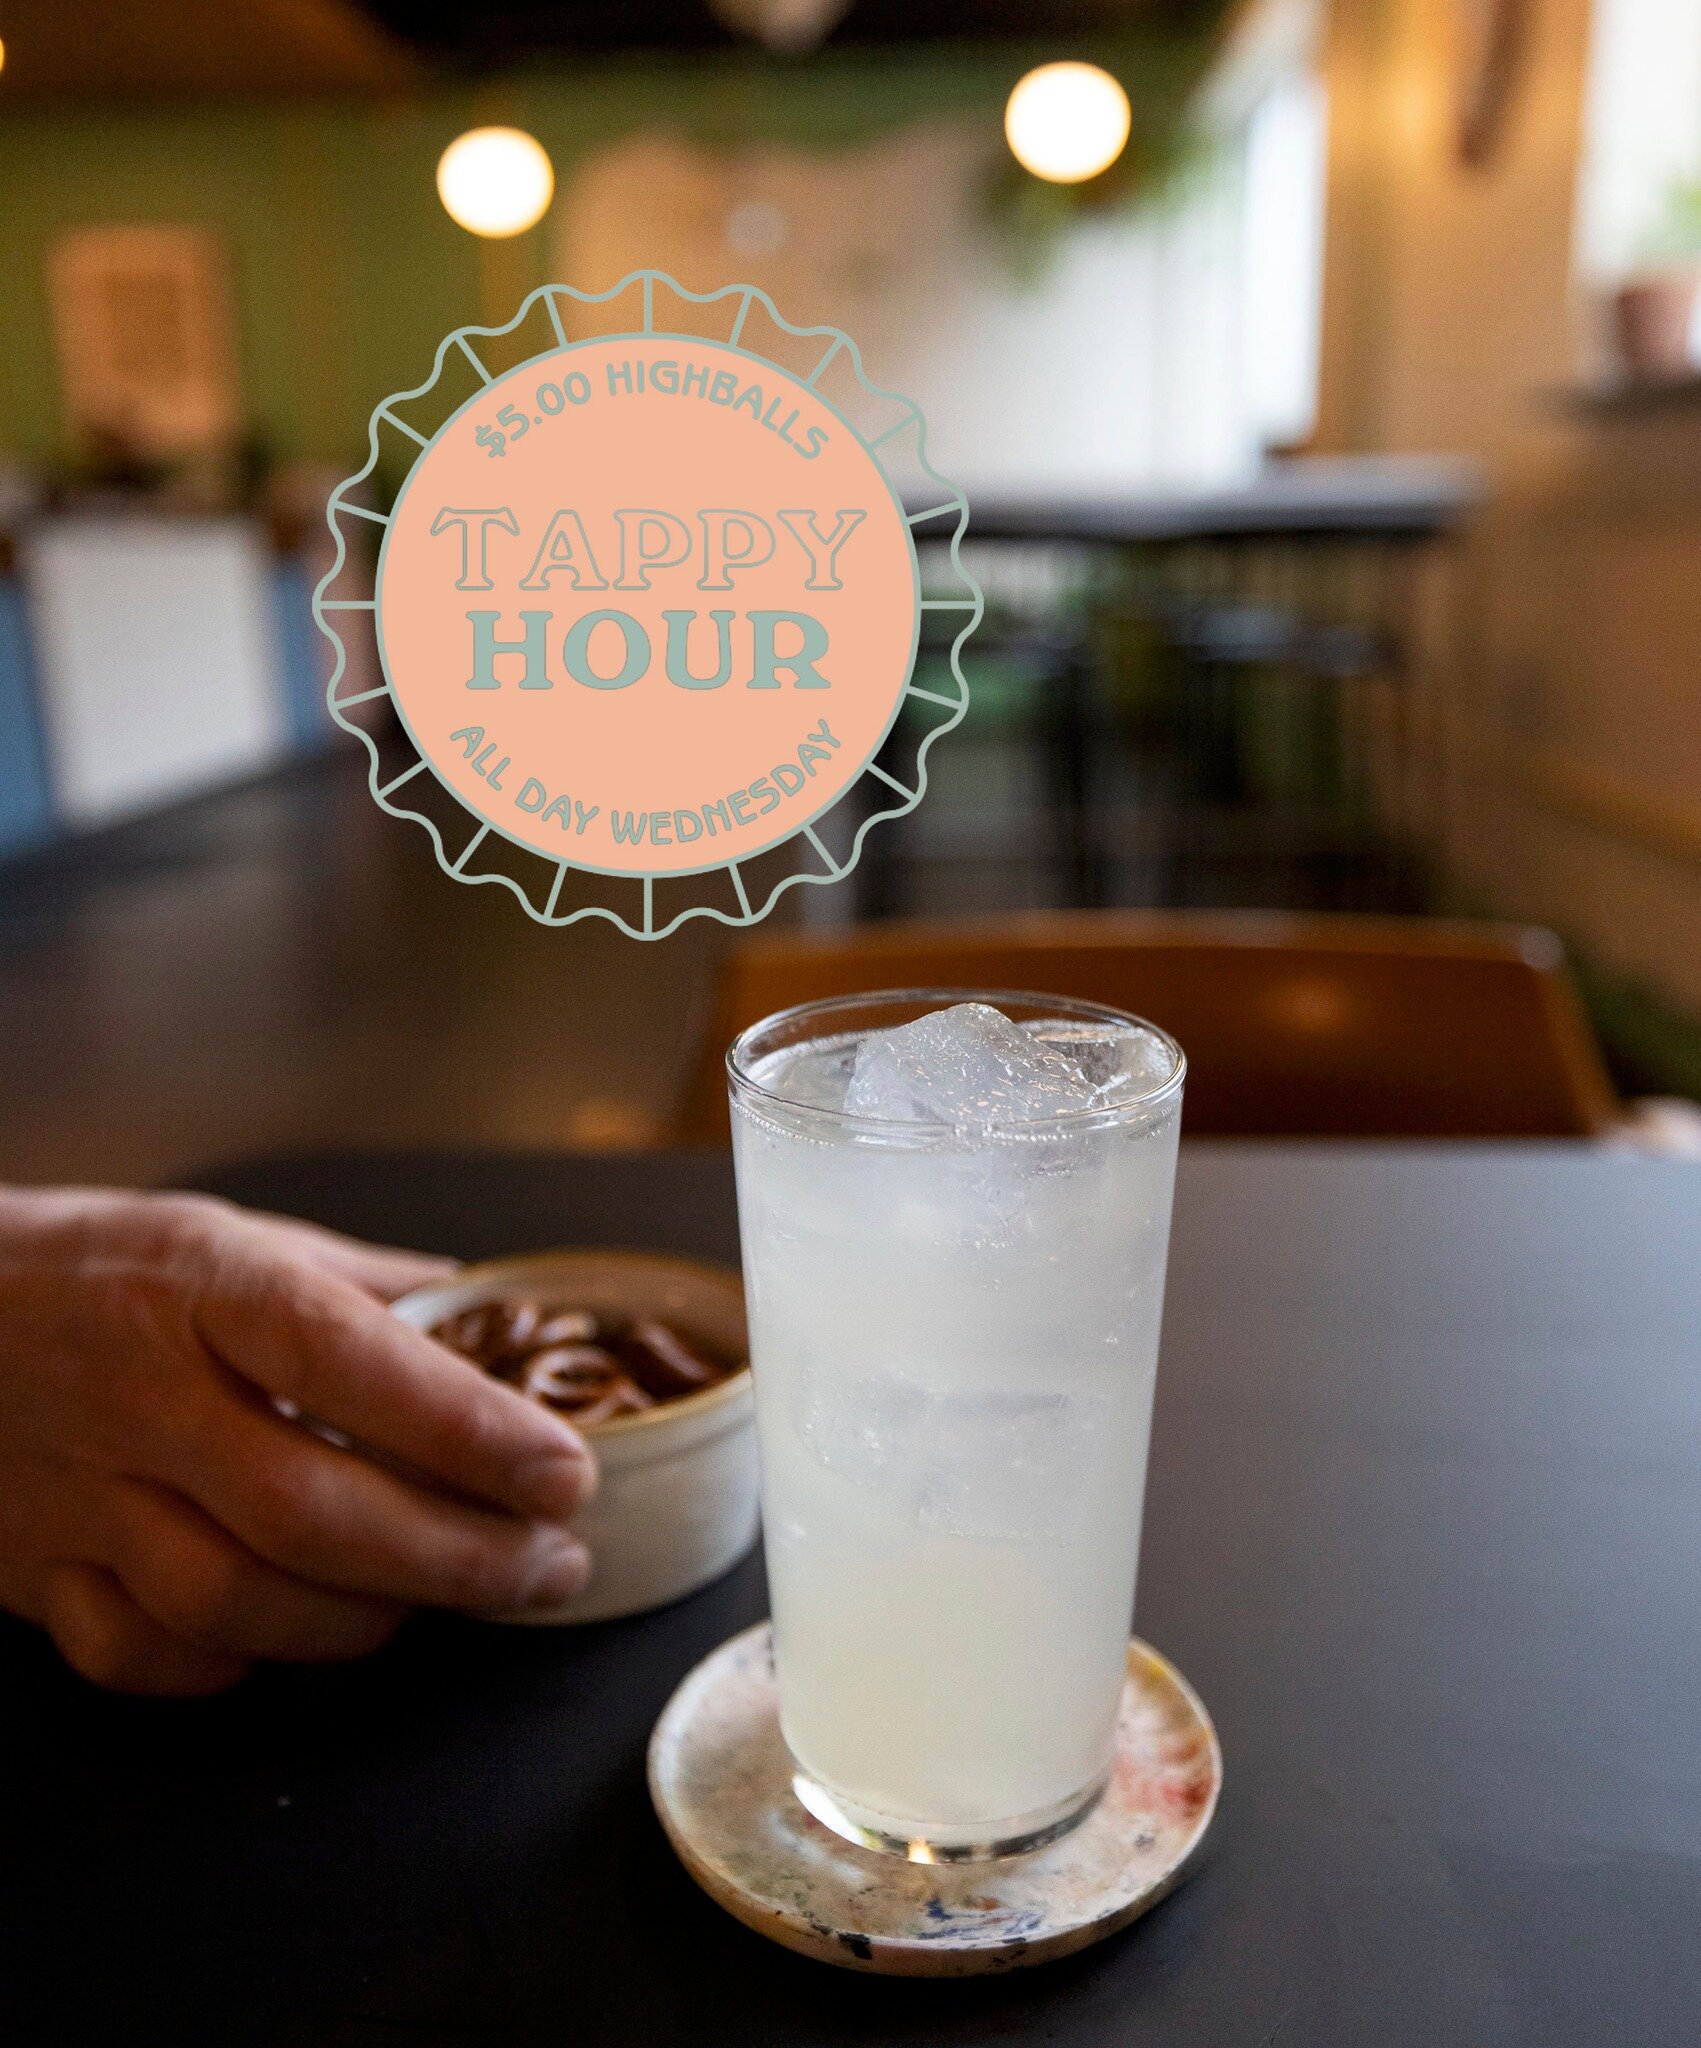 Try a WHITE GRAPEFRUIT HIGHBALL (10.5% abv) during our every-Wednesday TAPPY HOUR, where draft cocktails at $5 all day 💫